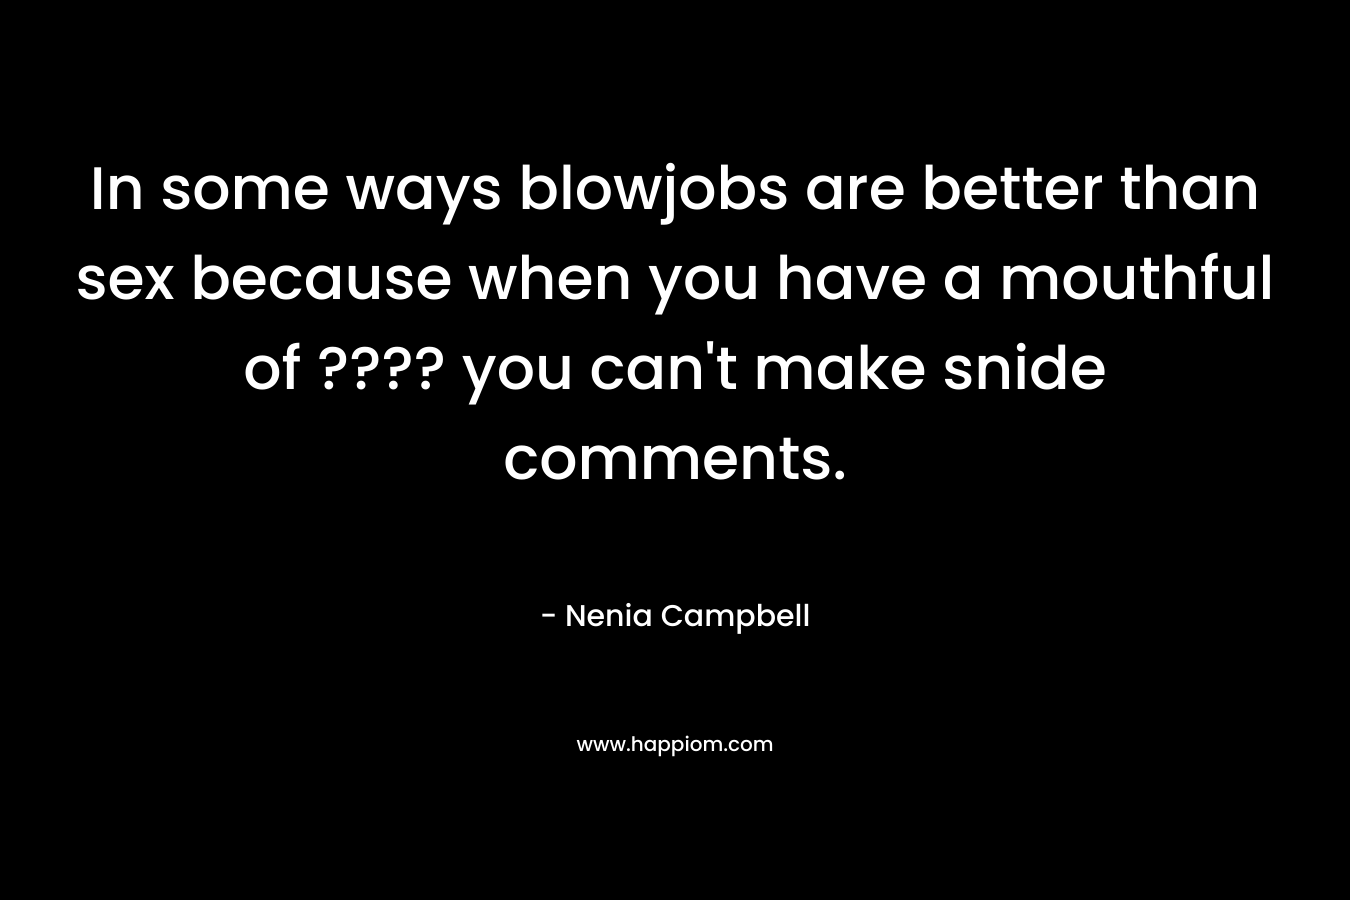 In some ways blowjobs are better than sex because when you have a mouthful of ???? you can’t make snide comments. – Nenia Campbell